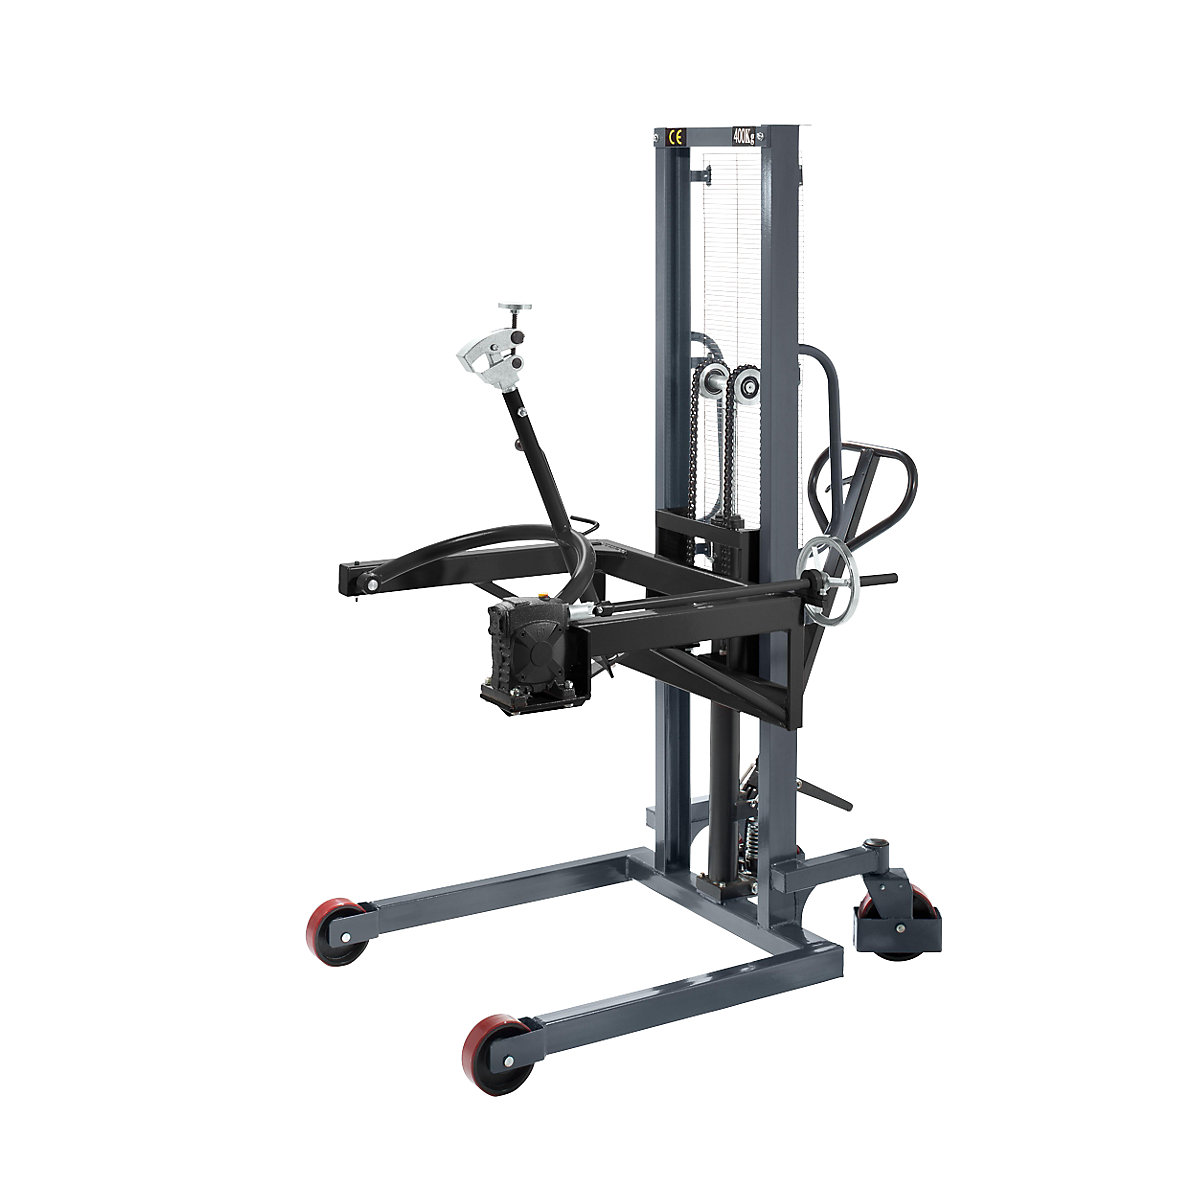 Drum lifting and tilting unit